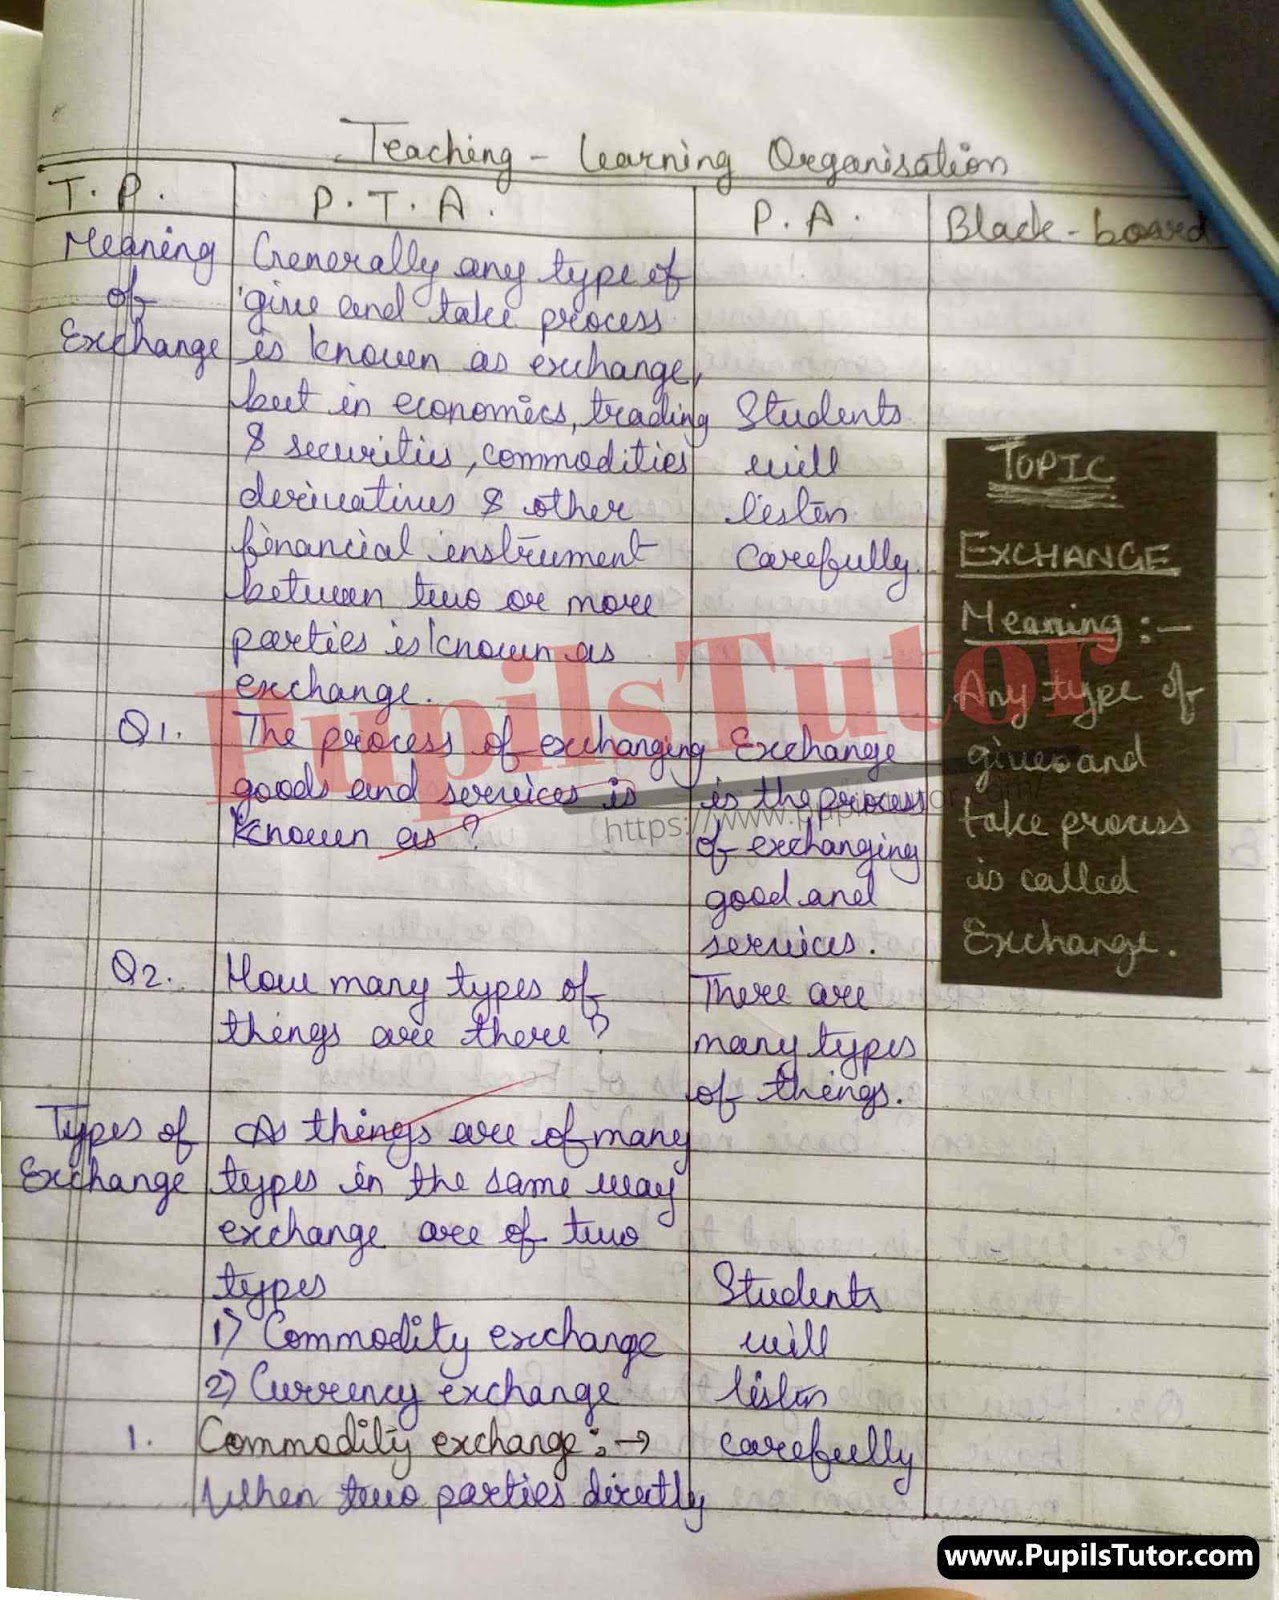 Economics Lesson Plan On Exchange For Class/Grade 11th And 12 For CBSE NCERT School And College Teachers  – (Page And Image Number 3) – www.pupilstutor.com